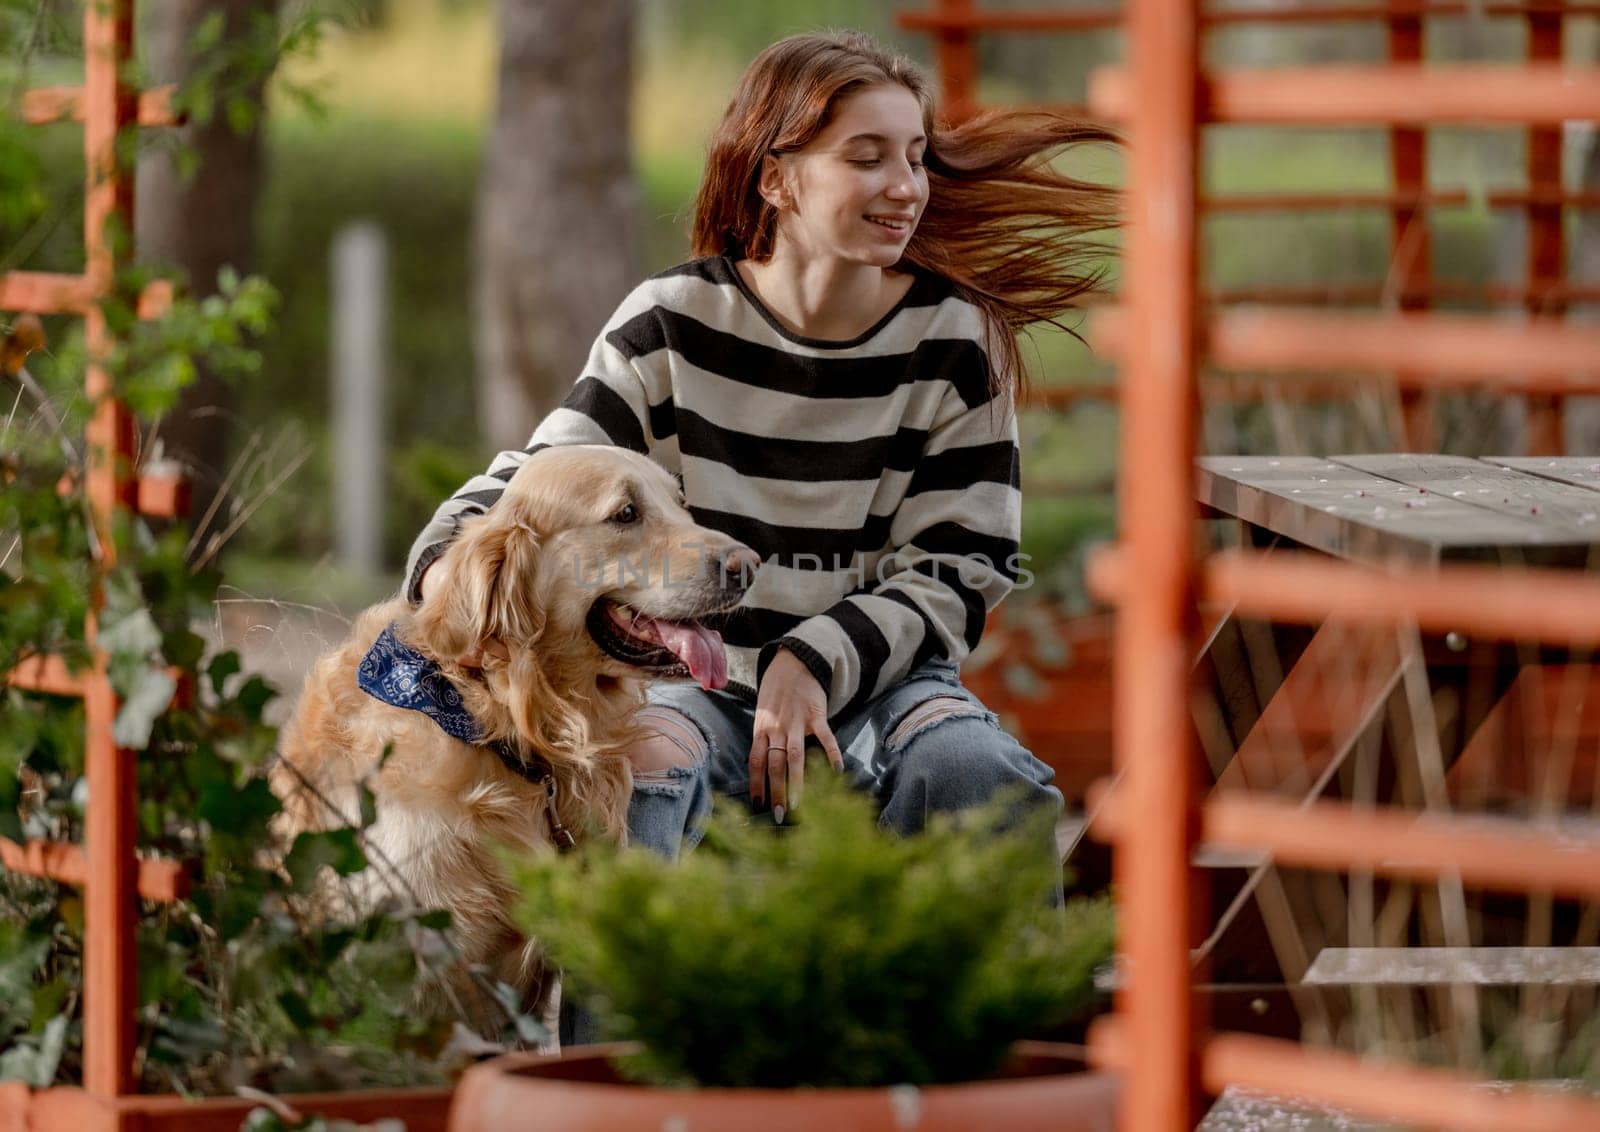 Teen Girl Plays With Golden Retriever In Gazebo During Spring